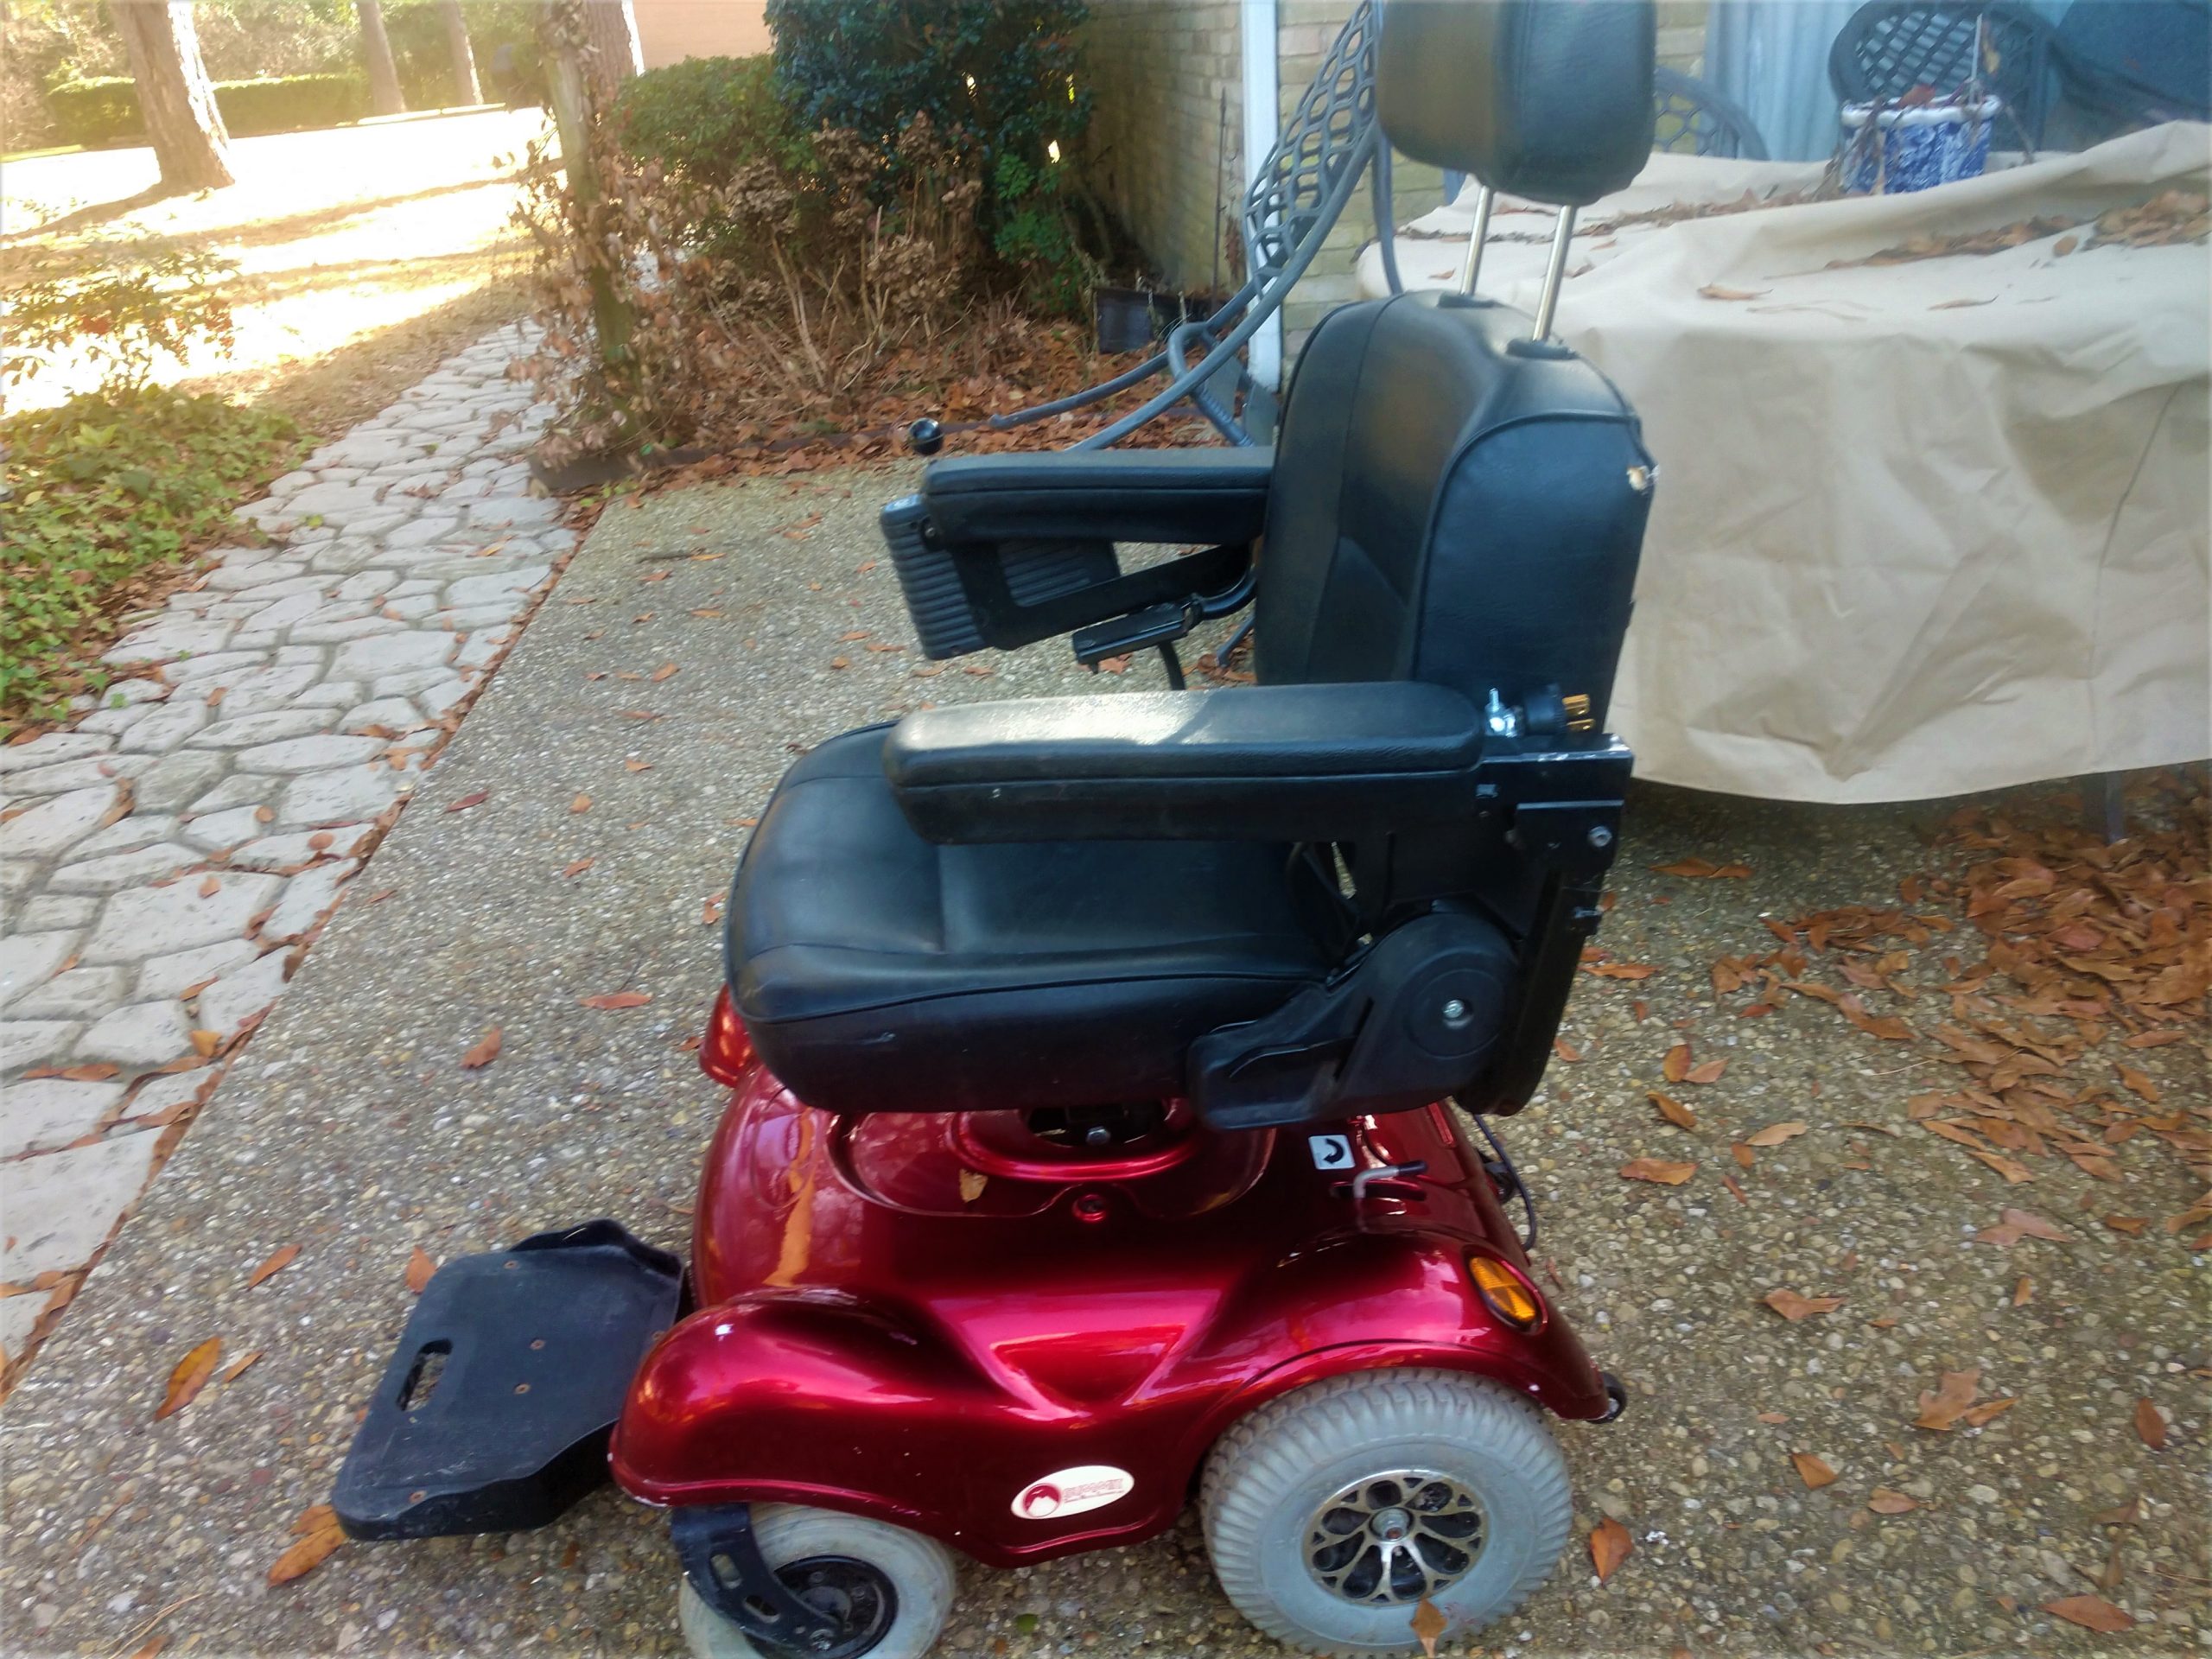 For Sale In Tyler Used Electric Wheel Chair Buy Sell Used Electric Wheelchairs Mobility Scooters More